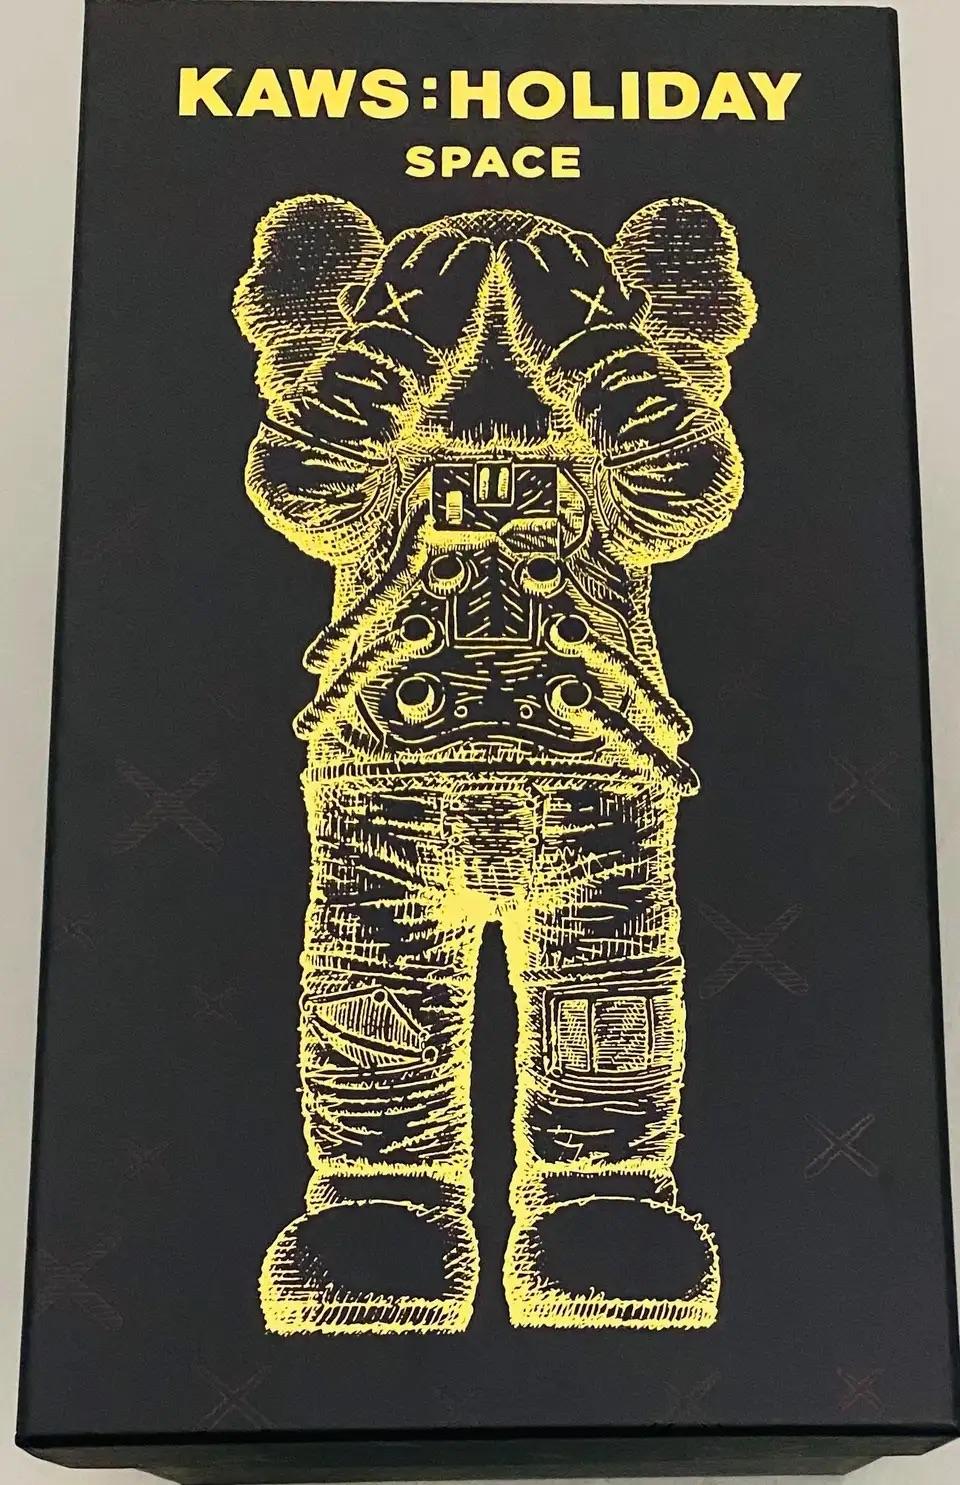 KAWS Holiday SPACE: complete set of 3 works (KAWS holiday space set)  8